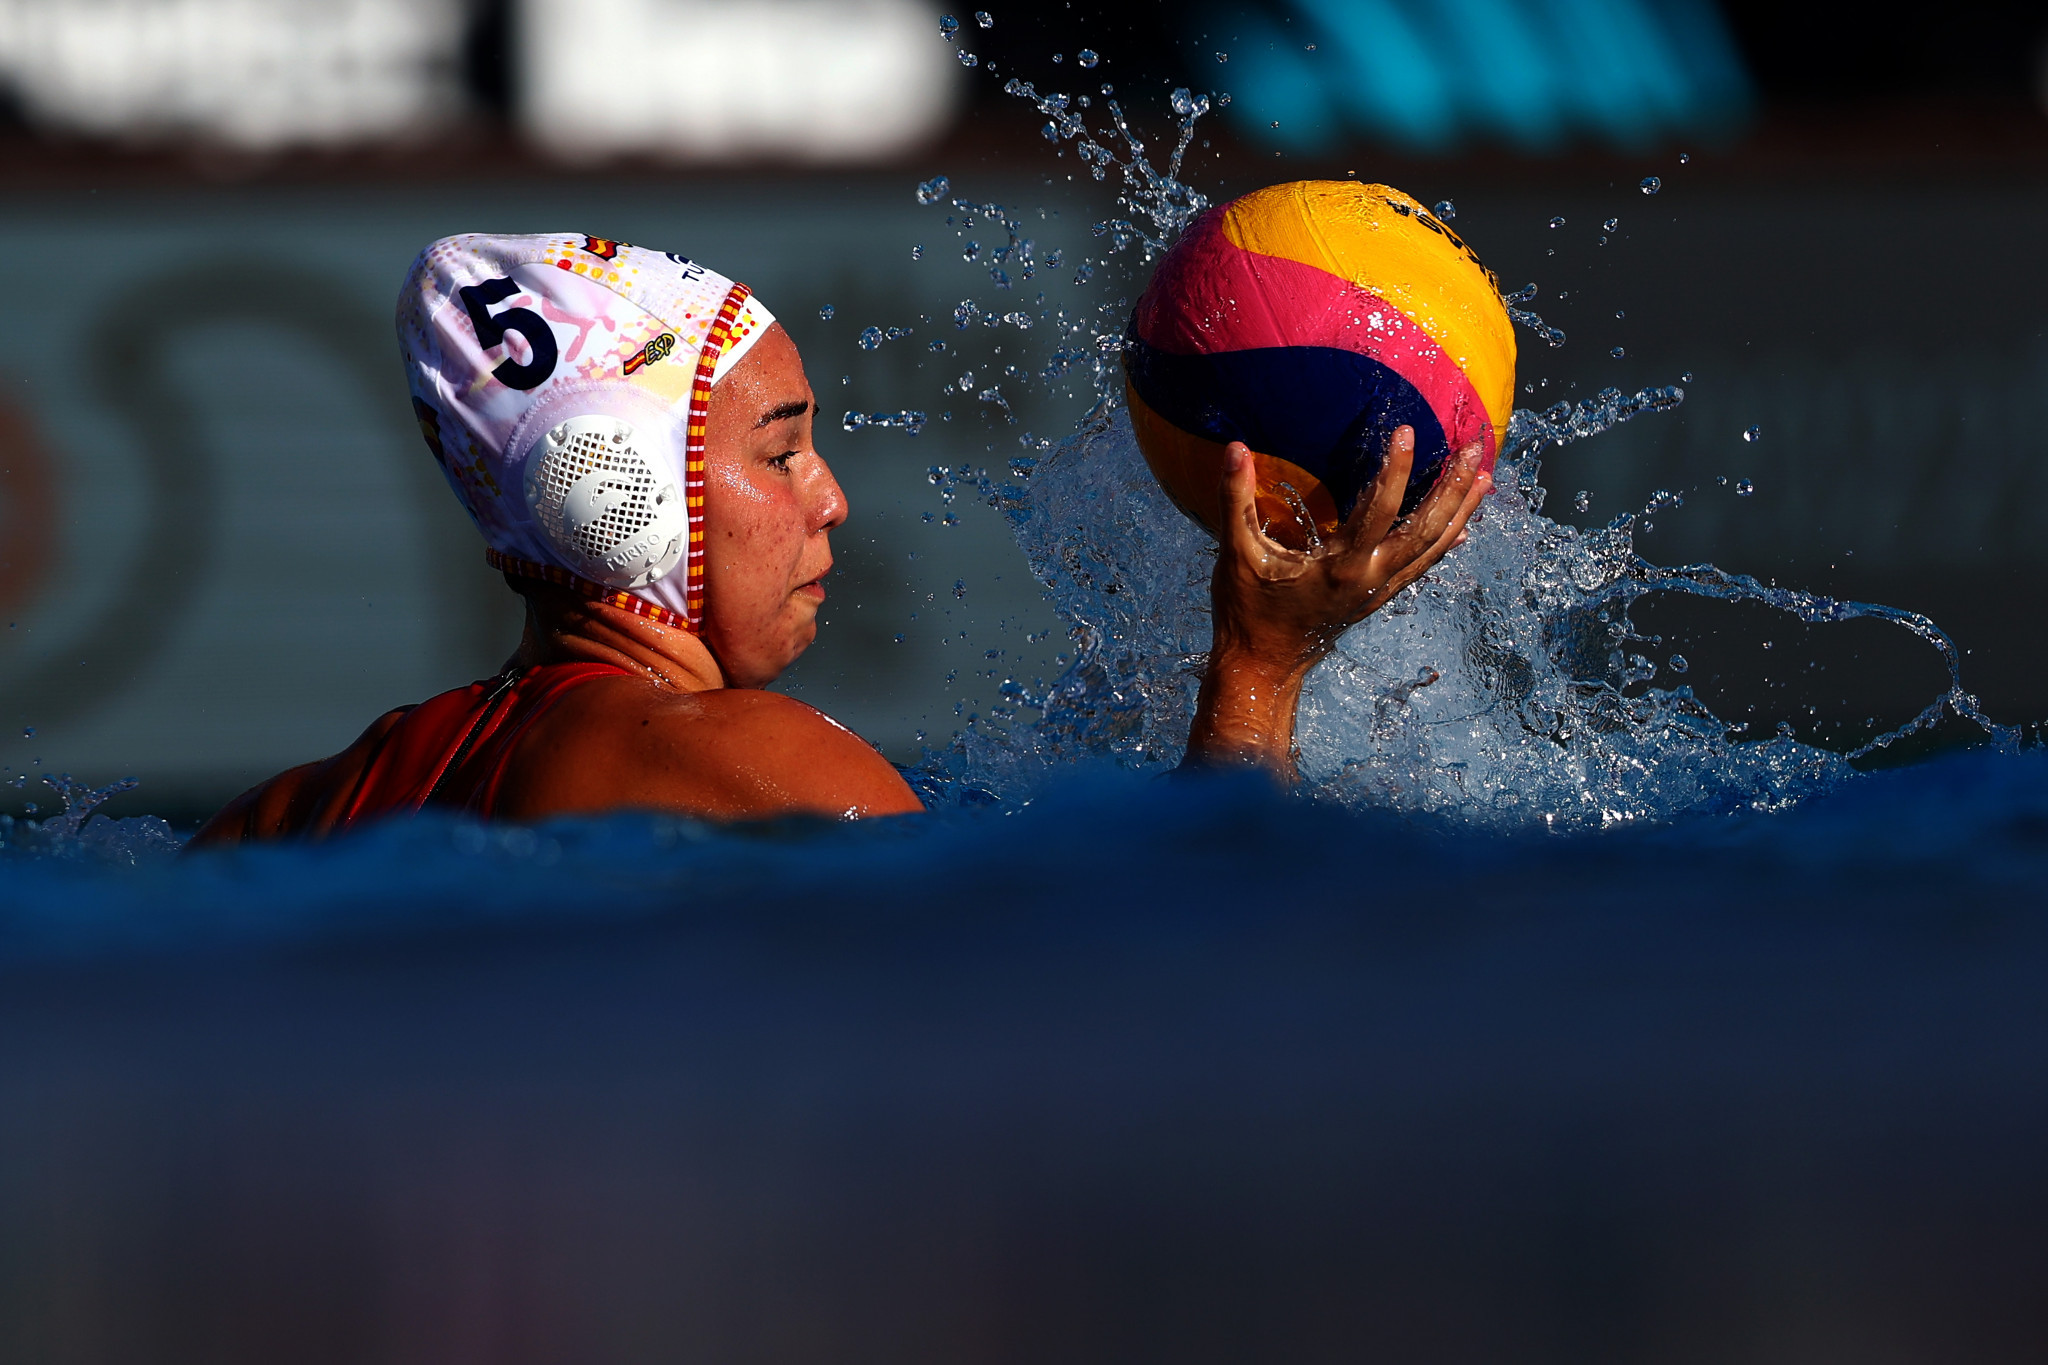 Nona Perez was one of the top scorers for Spain ©Getty Images